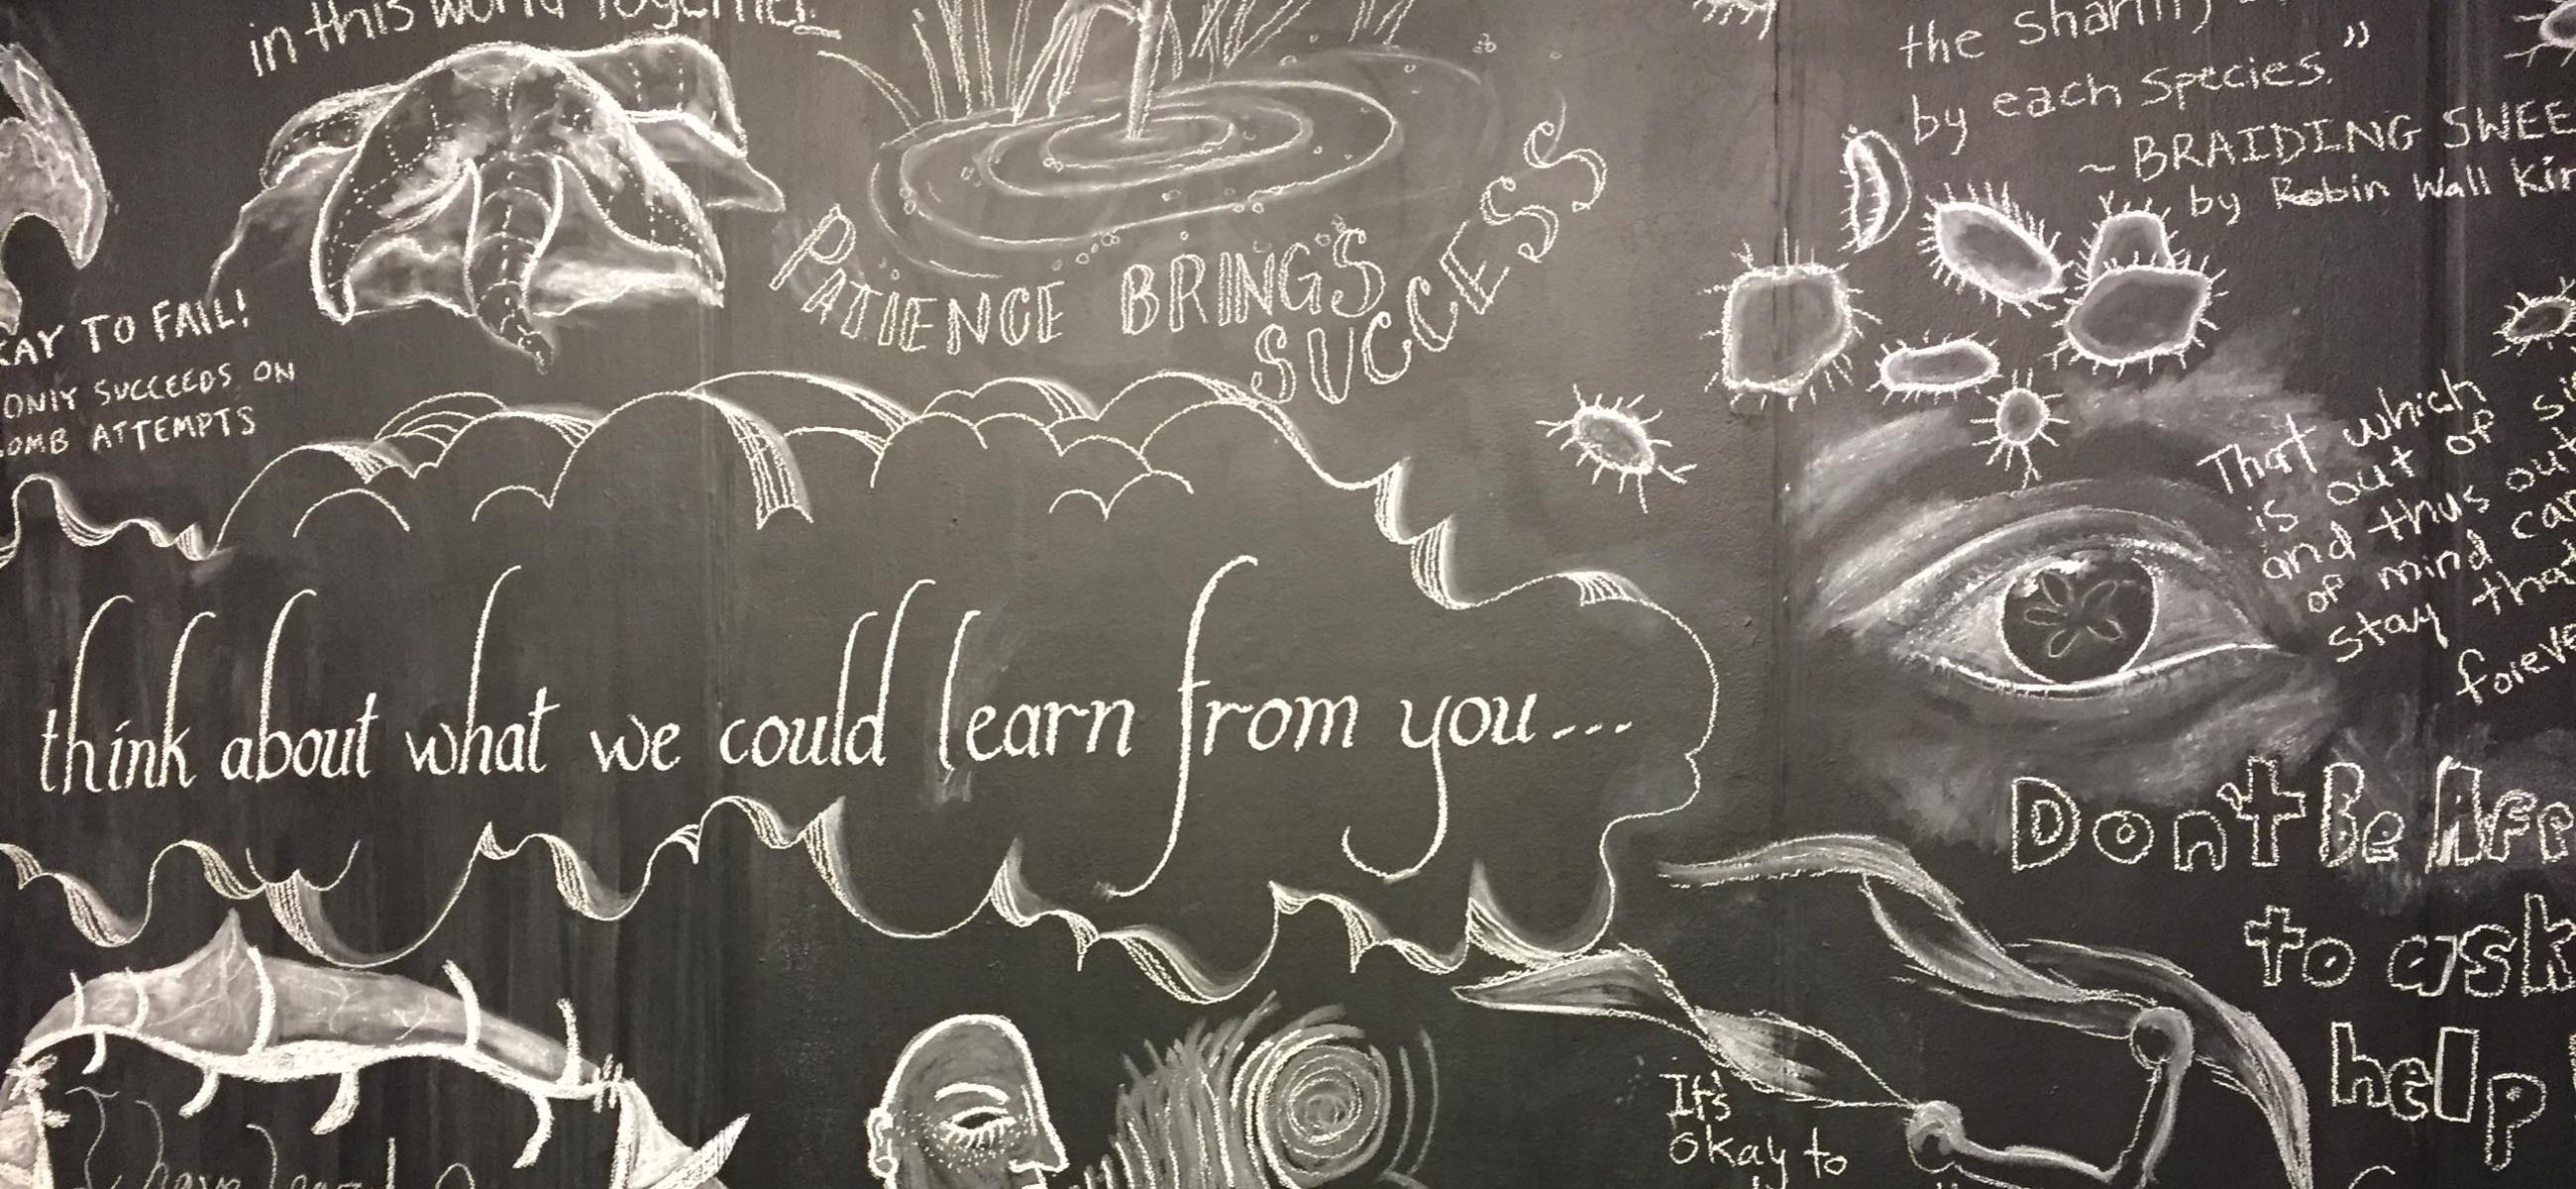 blackboard covered in chalk drawings and words of a generally ecological nature